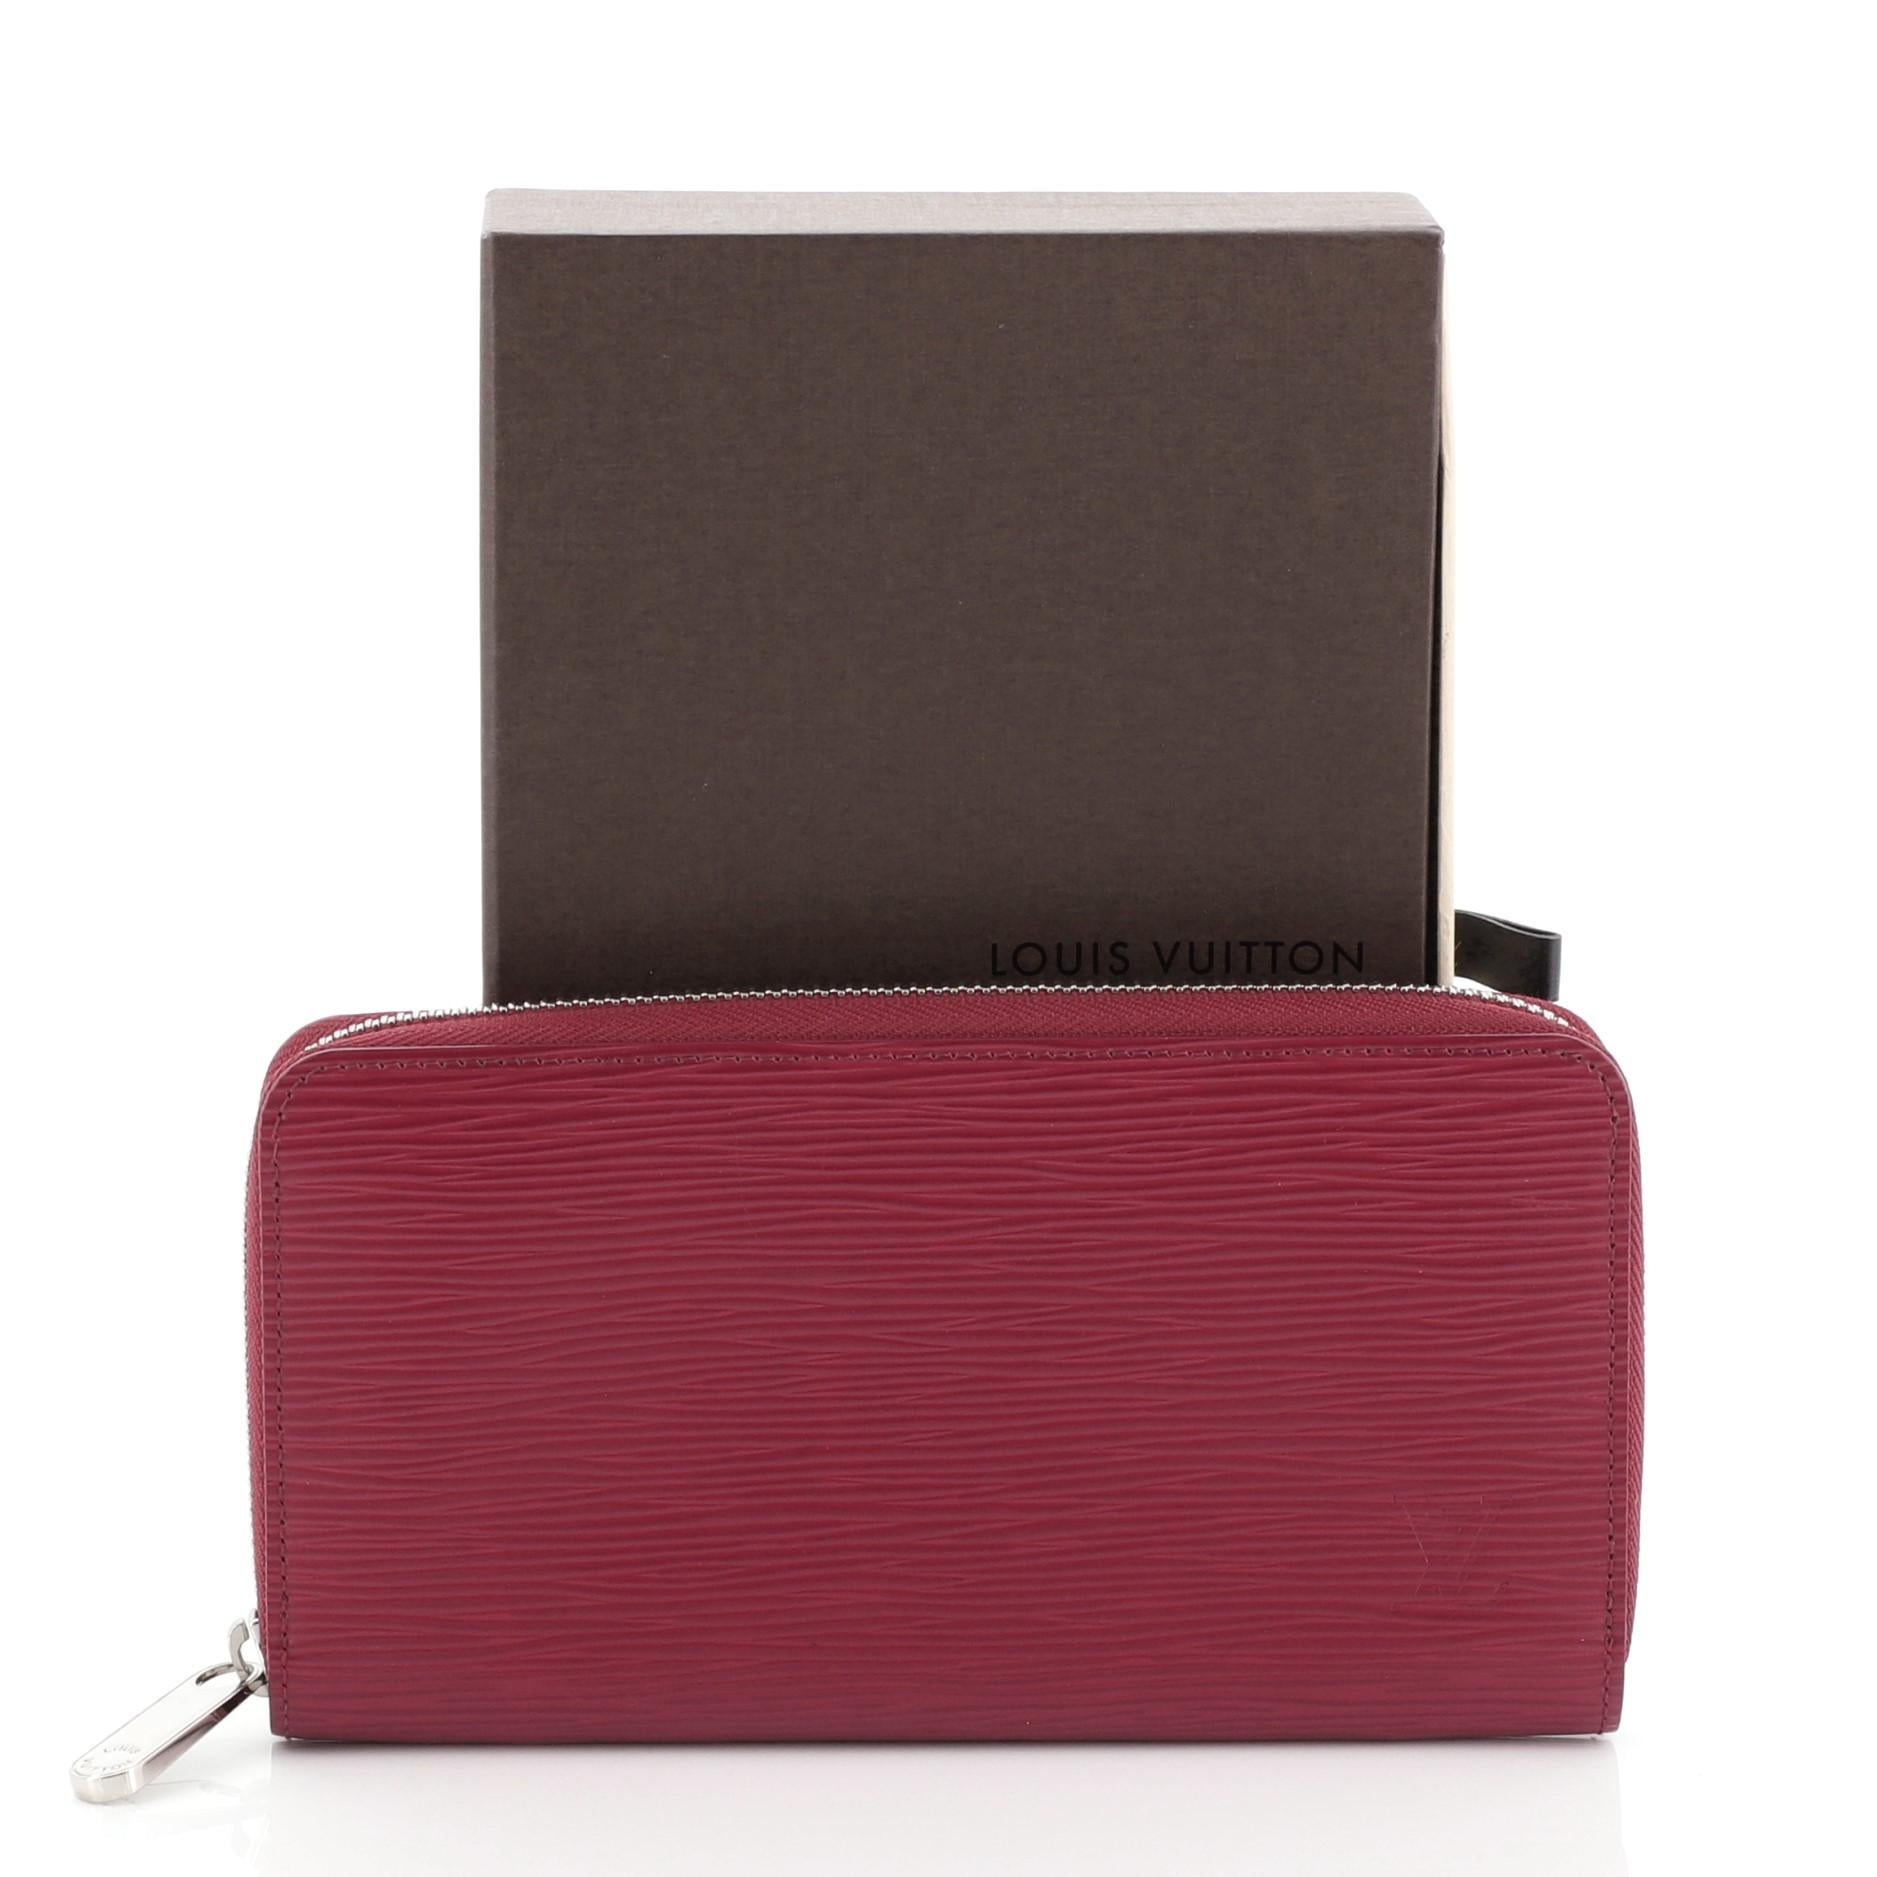 This Louis Vuitton Zippy Wallet Epi Leather, crafted in pink epi leather, features silver-tone hardware. Its zip around closure opens to a pink leather interior with multiple card slots, zip compartment and slip pocket. Authenticity code reads: